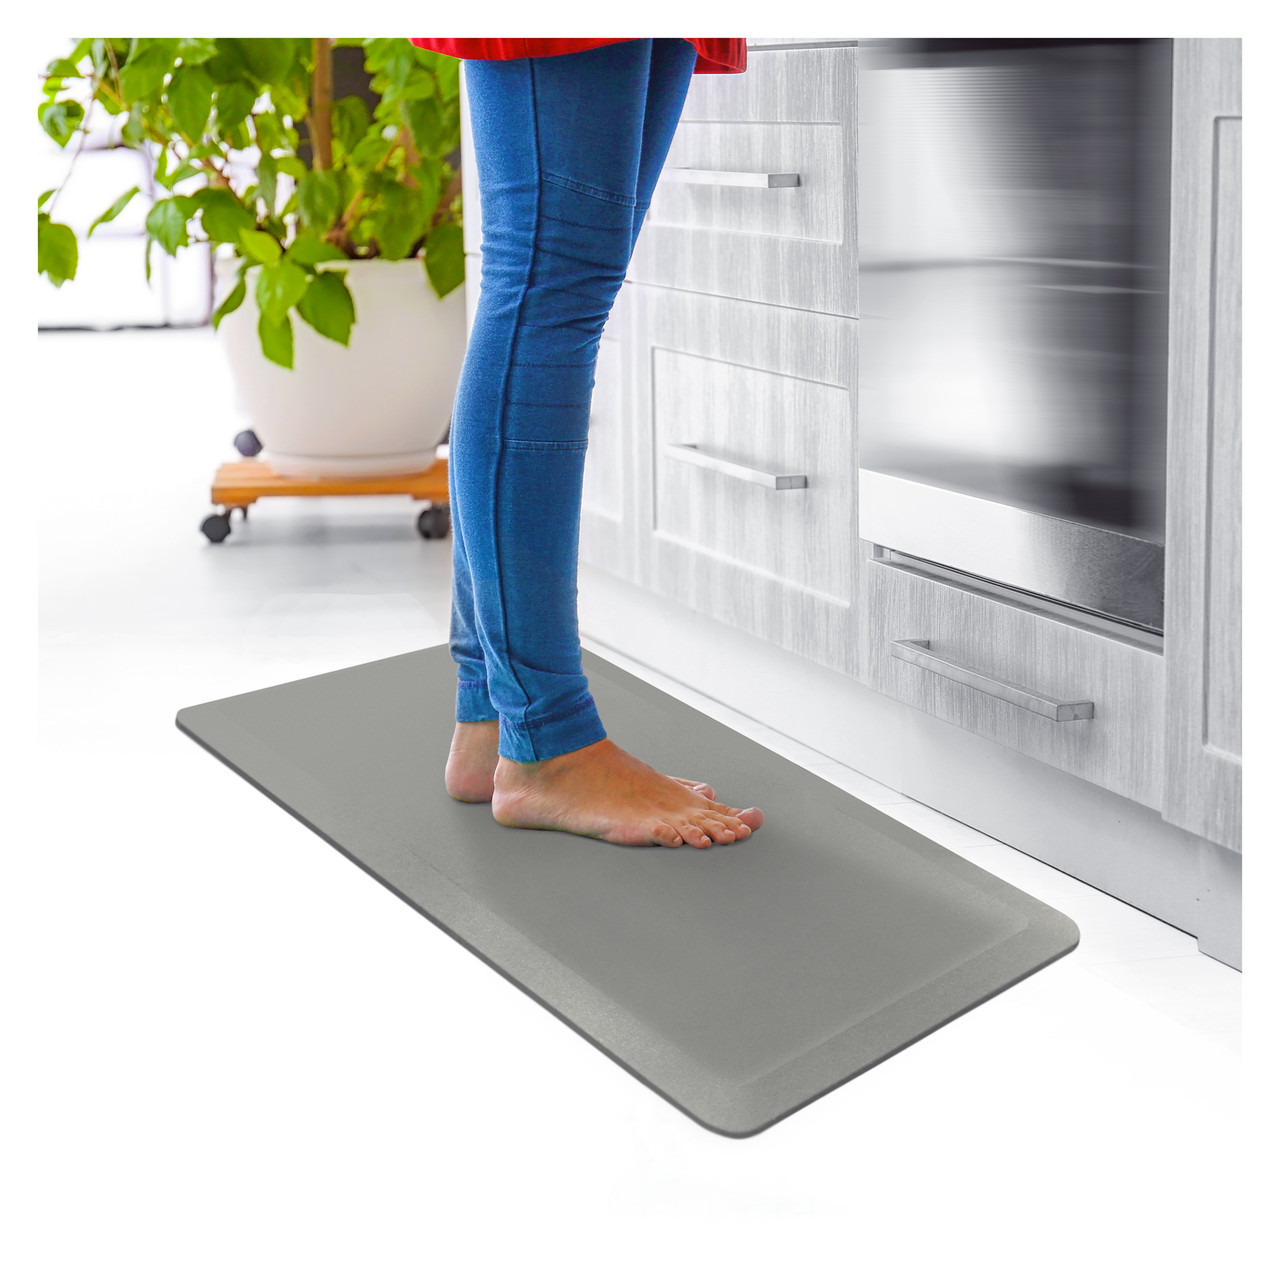 https://cdn11.bigcommerce.com/s-fjwps1jbkv/images/stencil/1280x1280/products/329/3392/ultralux-premium-anti-fatigue-floor-comfort-mat-or-durable-ergonomic-multi-purpose-non-slip-standing-support-pad-or-34-thick-or-gray__79656.1688991283.jpg?c=2?imbypass=on